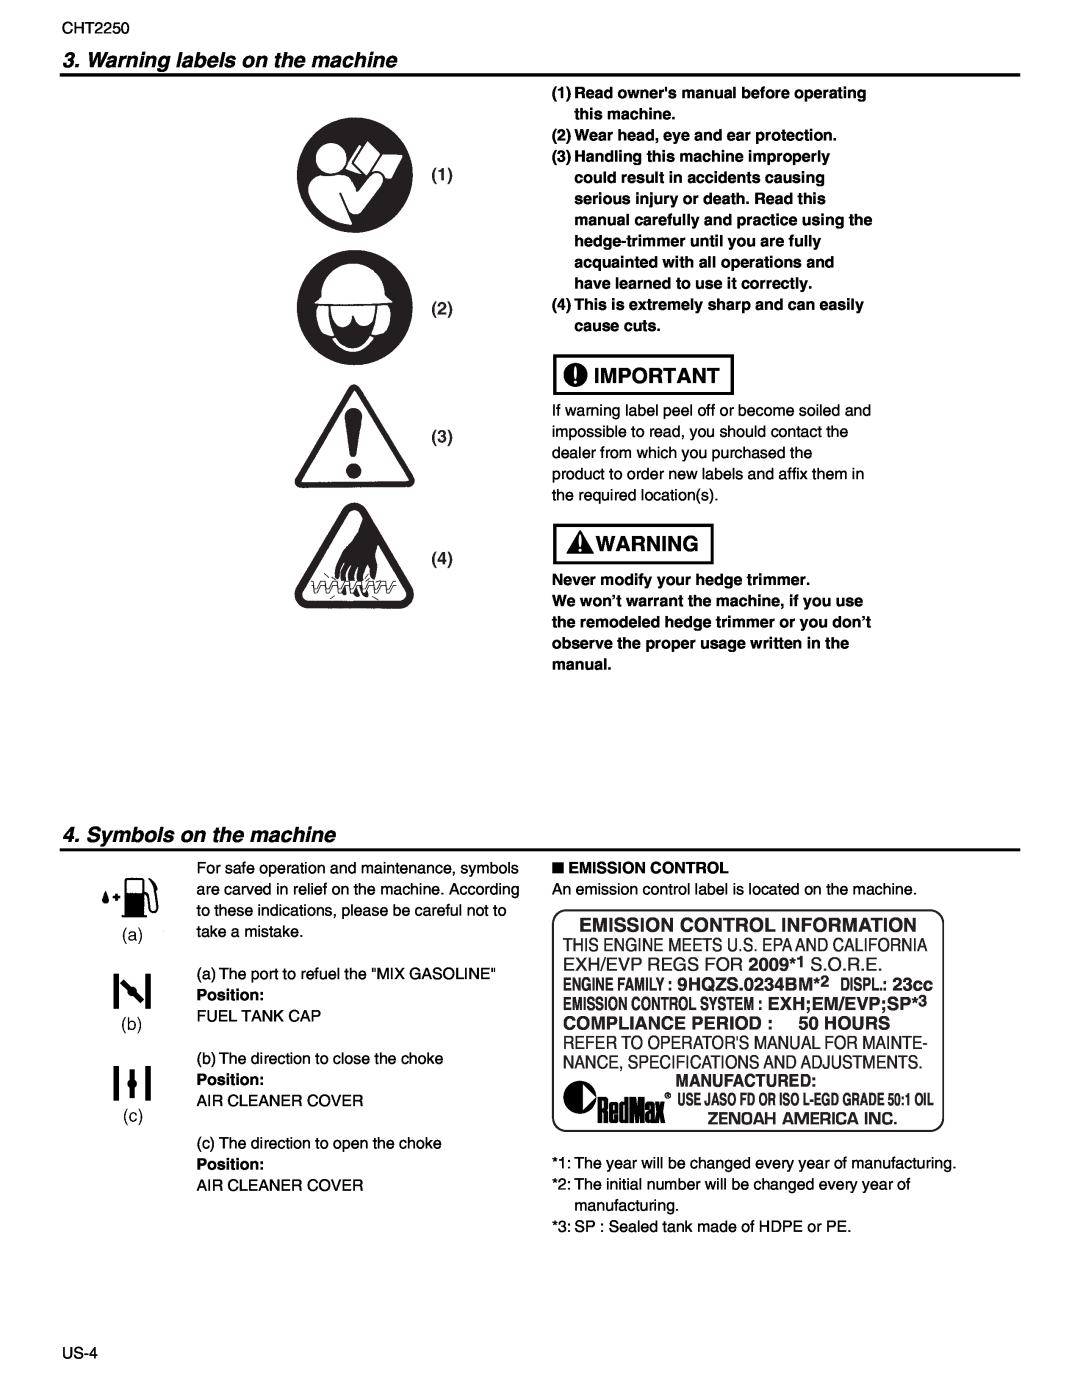 RedMax CHT2250 manual Warning labels on the machine, Symbols on the machine, Emission Control Information 